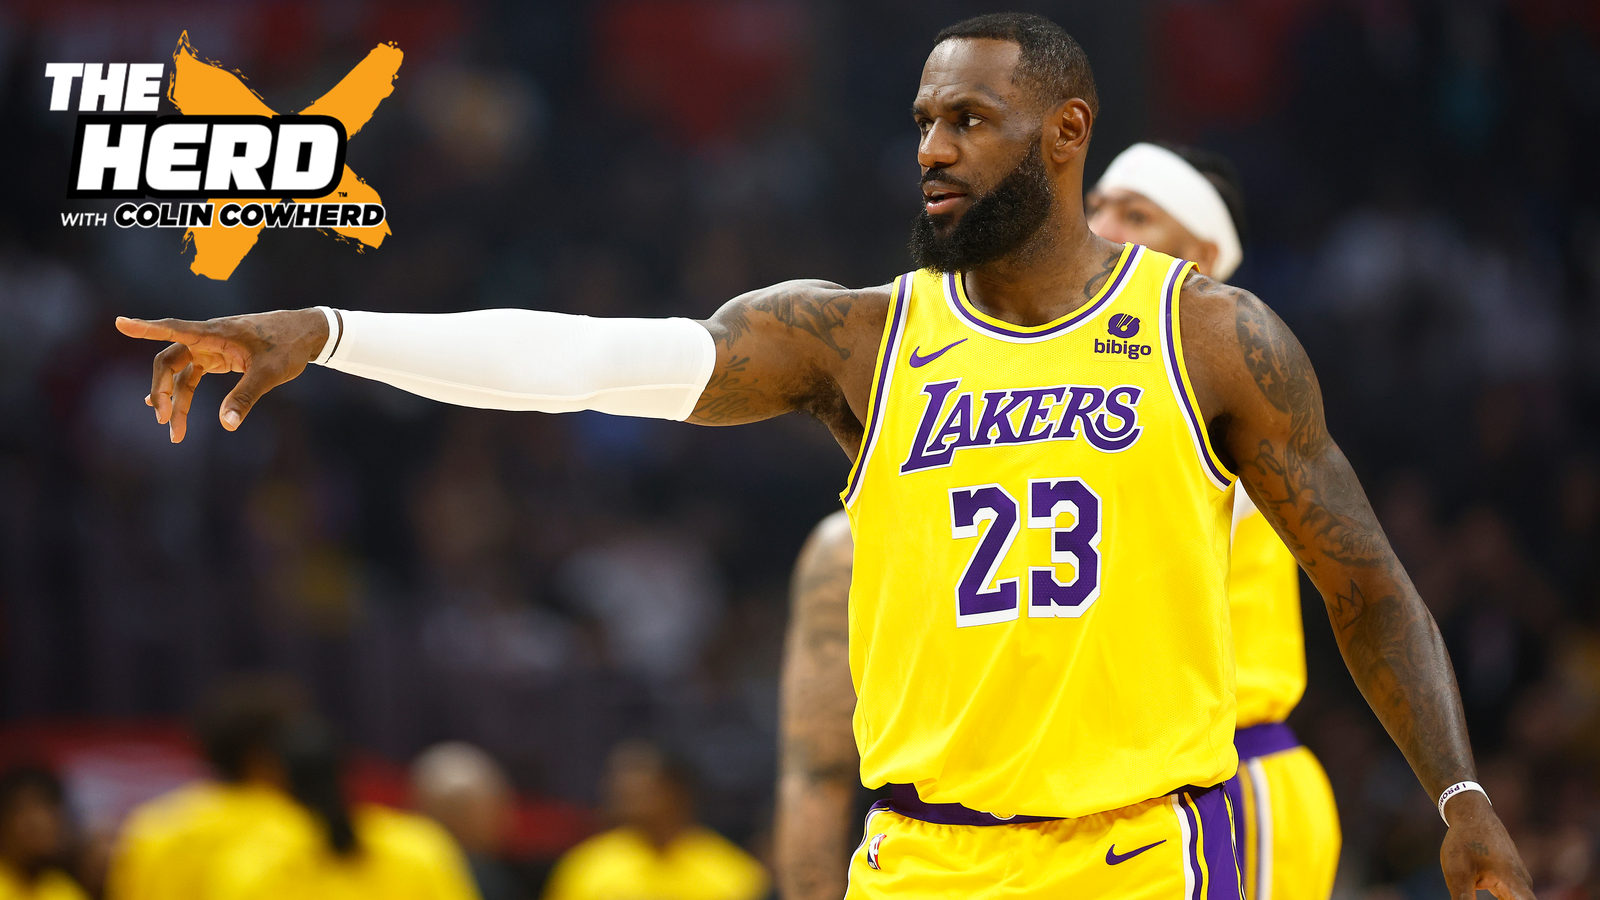 Is LeBron still the best player in the NBA?